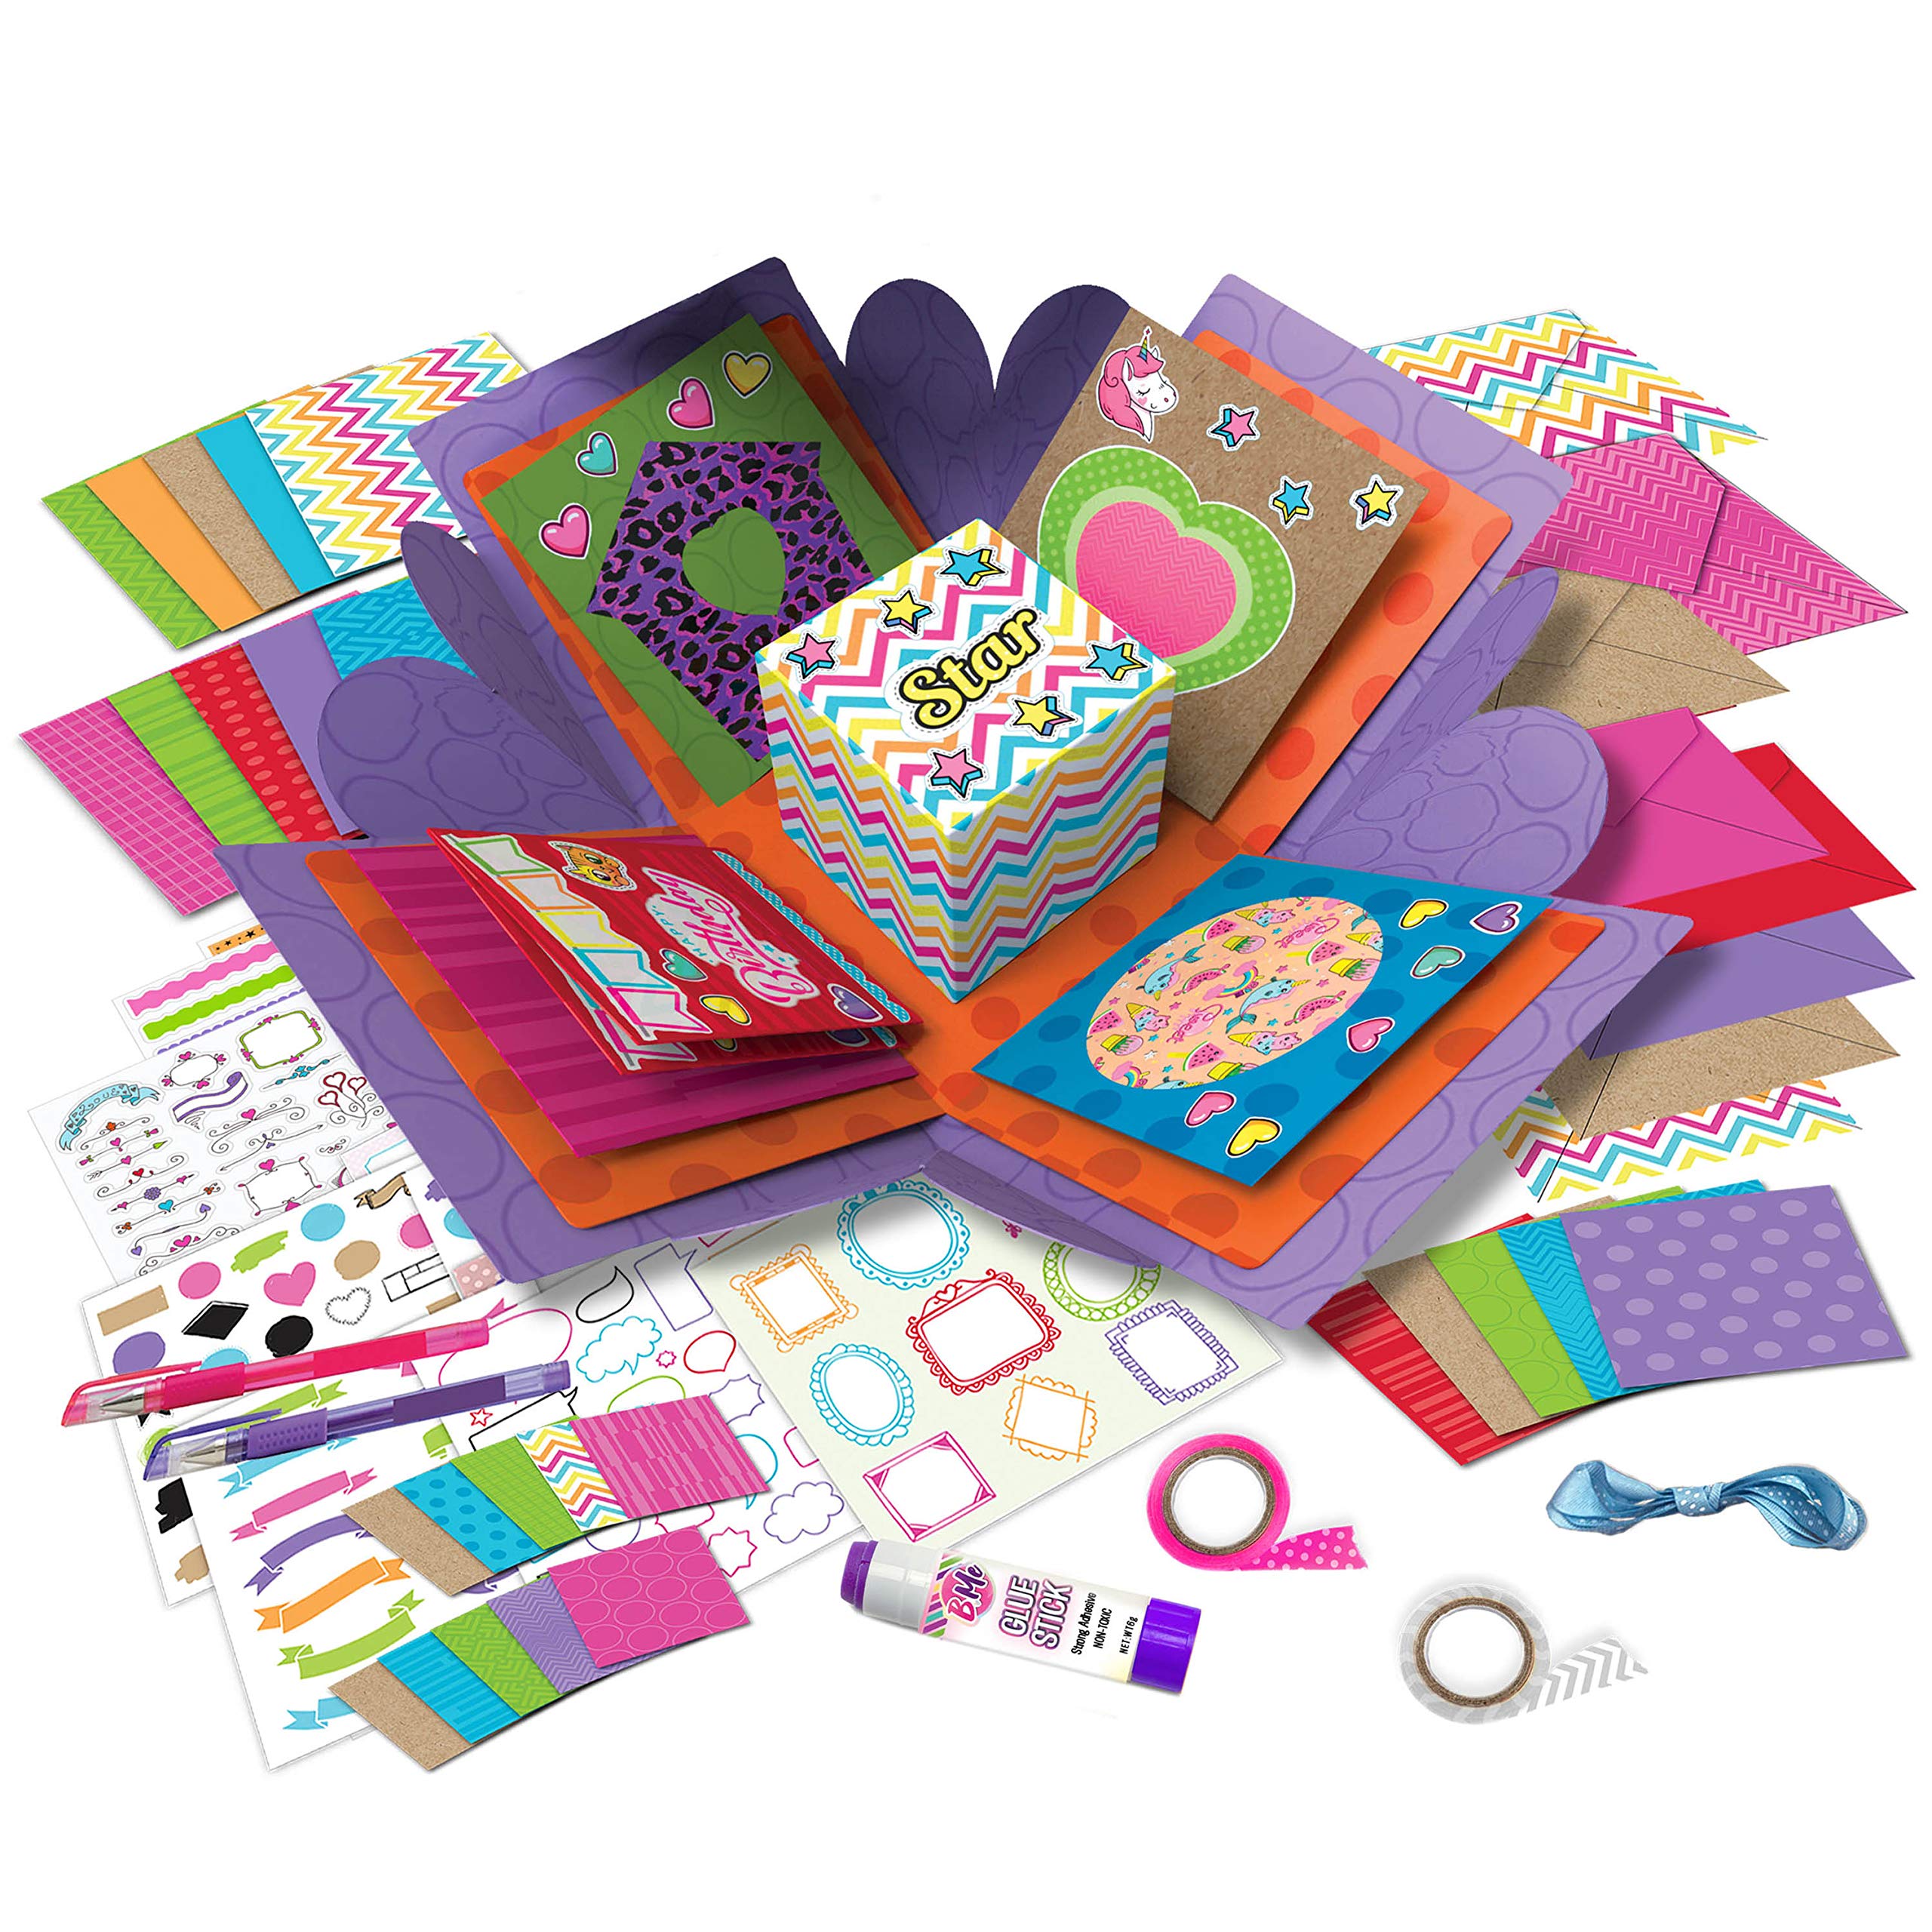 Card Crafting Explosion Arts and Crafts Box - Birthday Gift Box to Tween -  DIY Greeting Cards Stationary Set Make Your Own Card Crafts Age 6+